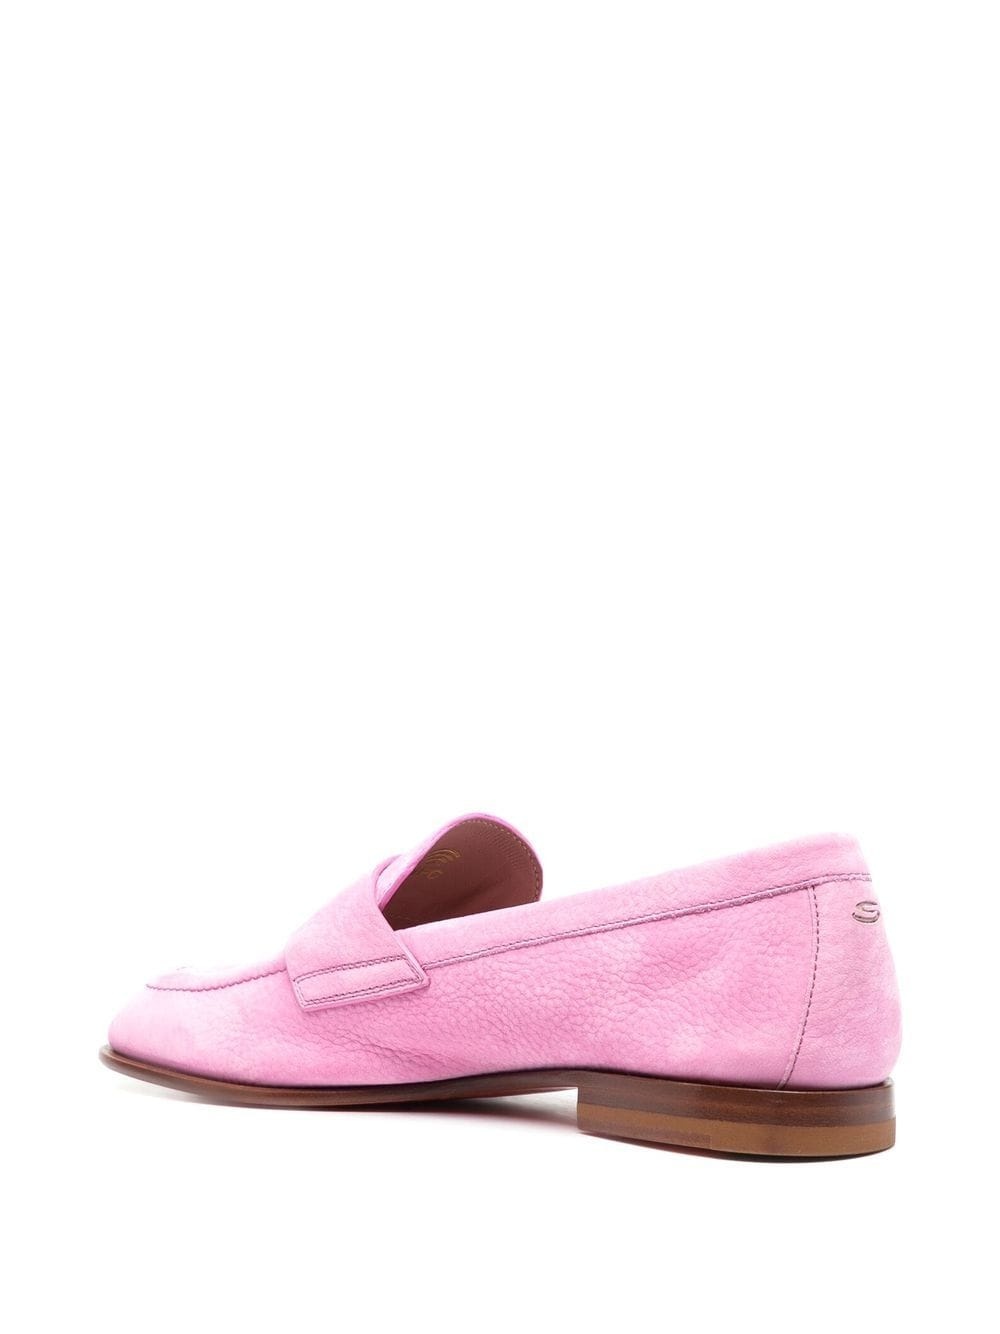 almond-toe 15mm penny loafers - 3